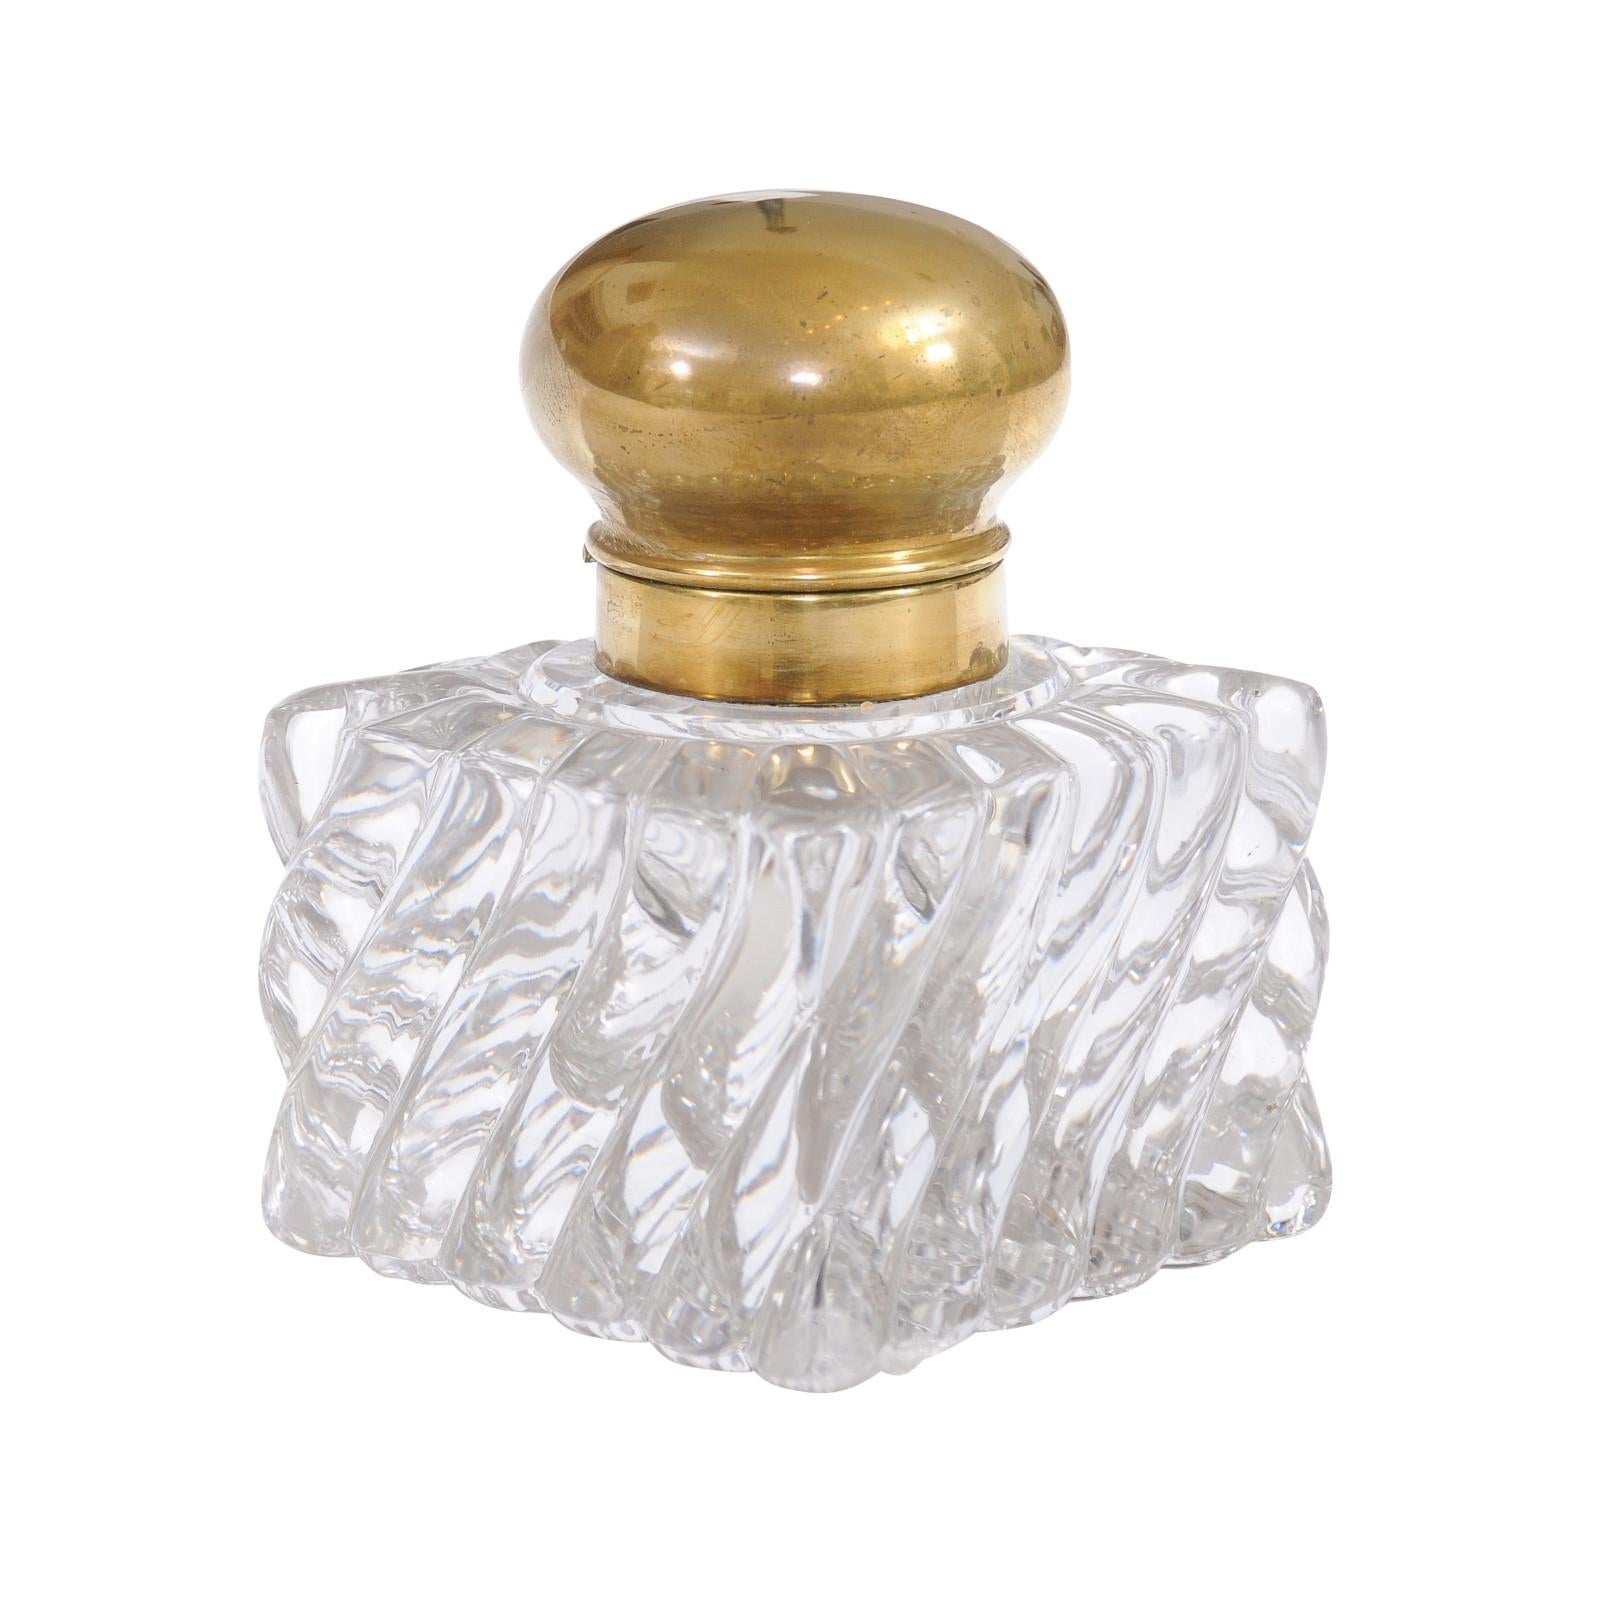 A French Napoléon III period Baccarat crystal desk inkwell from the late 19th century with Bamboo Tors décor and brass top. Enhance your desk with a touch of elegance and history with this Napoléon III period desk inkwell. Crafted in France during